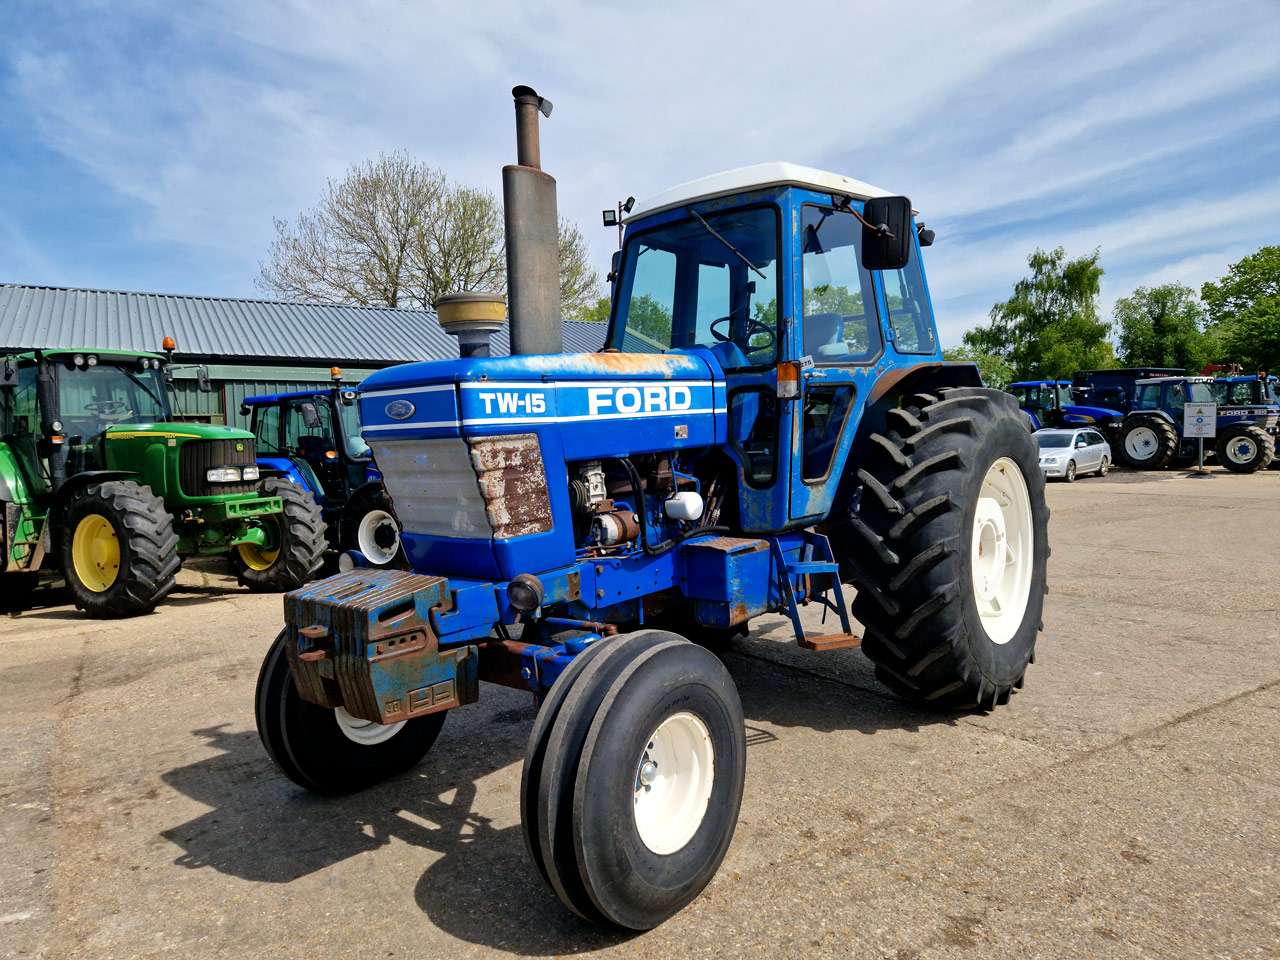 1983 Ford TW 15 2WD Tractor